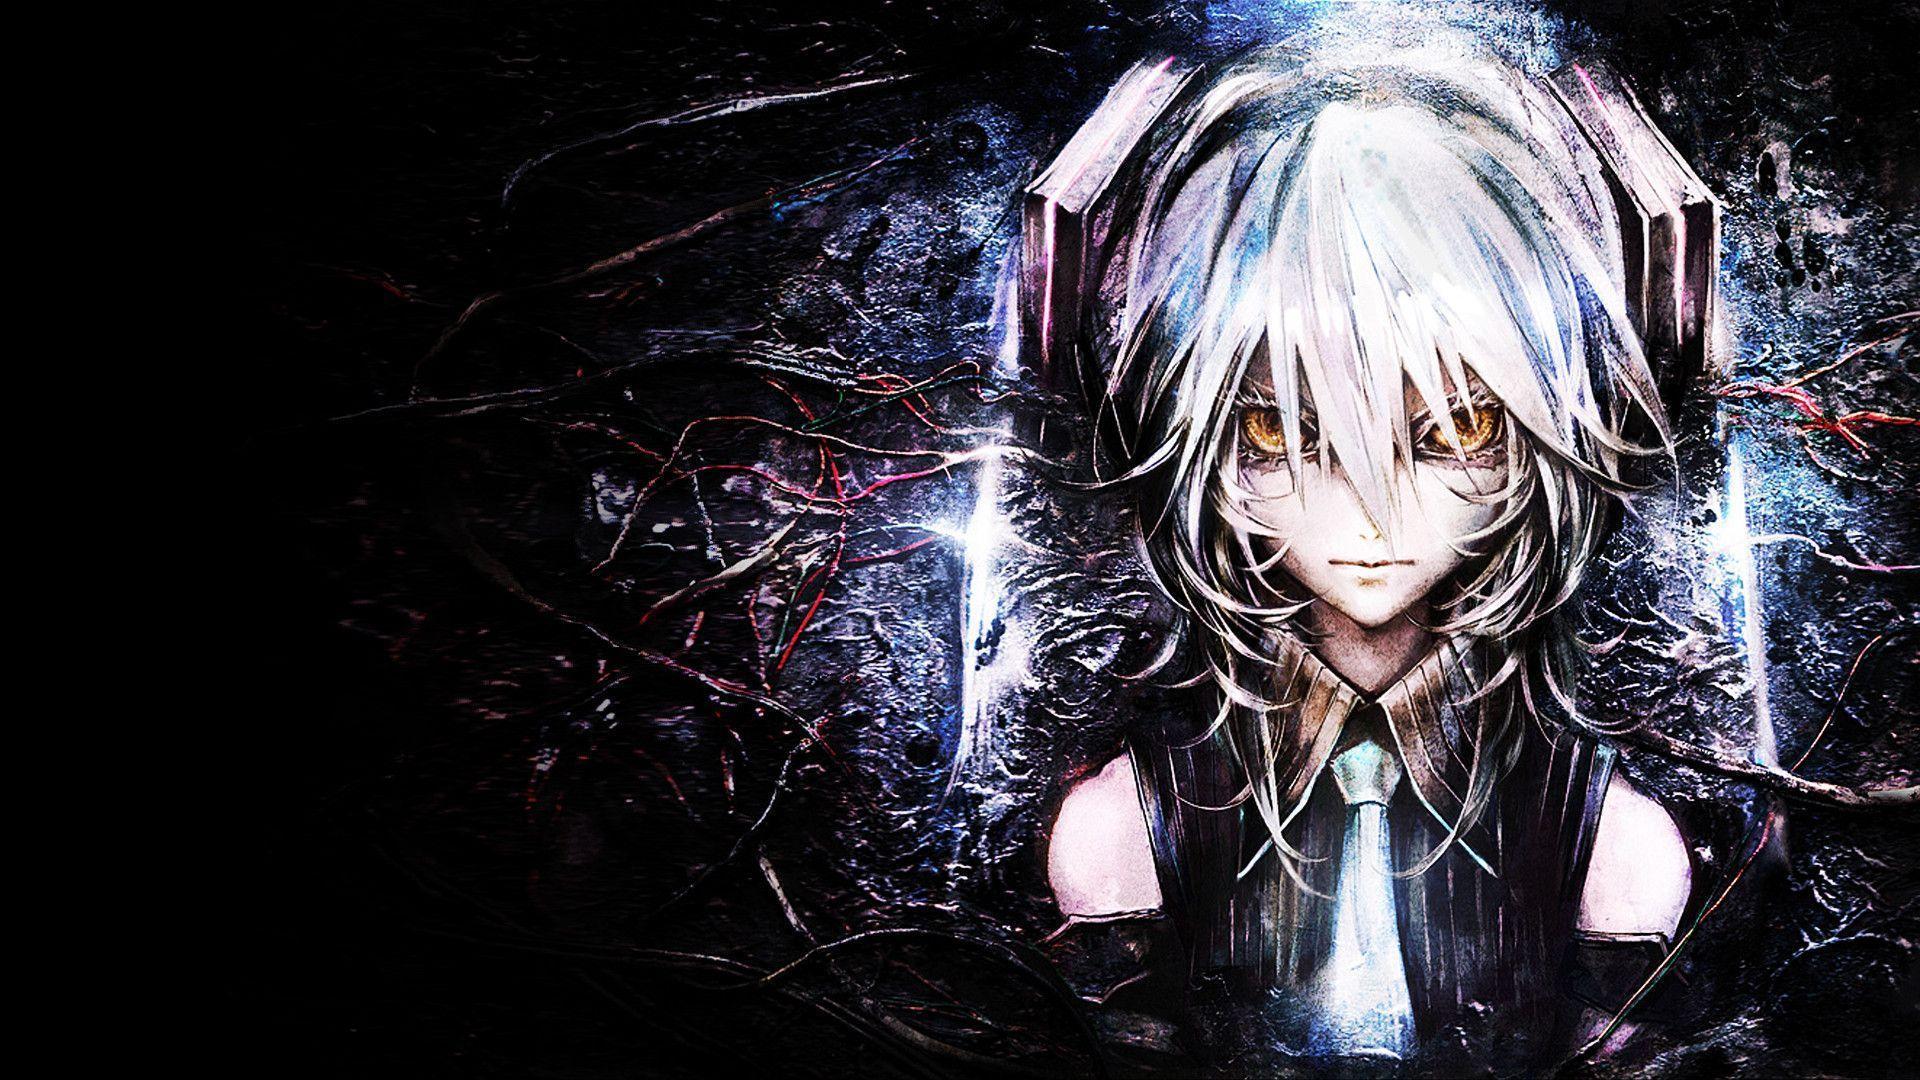 Cool Anime Wallpapers HD - Wallpaper Cave